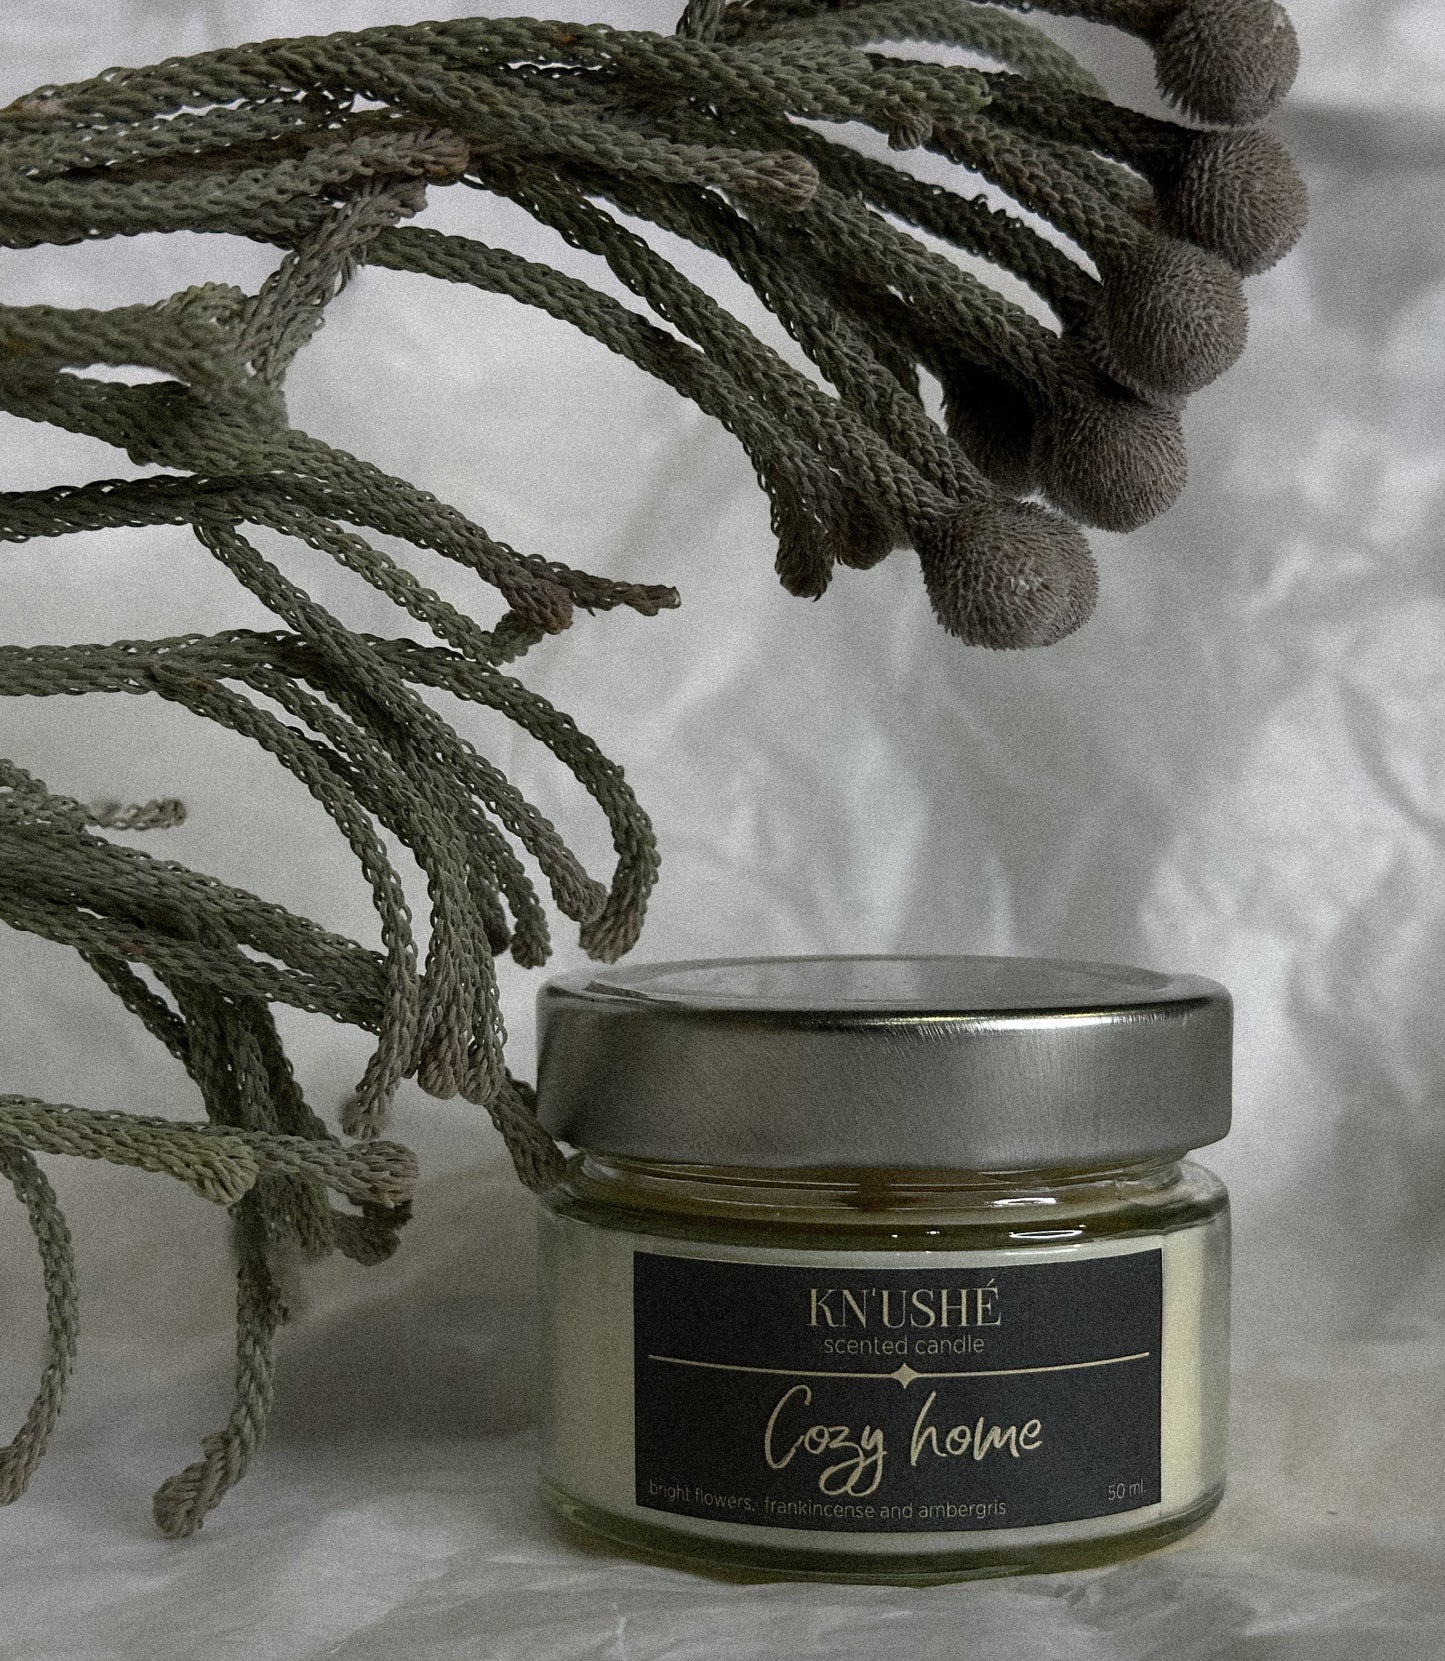 Scented candle made of vegetable soy wax with "Cozy home" scent